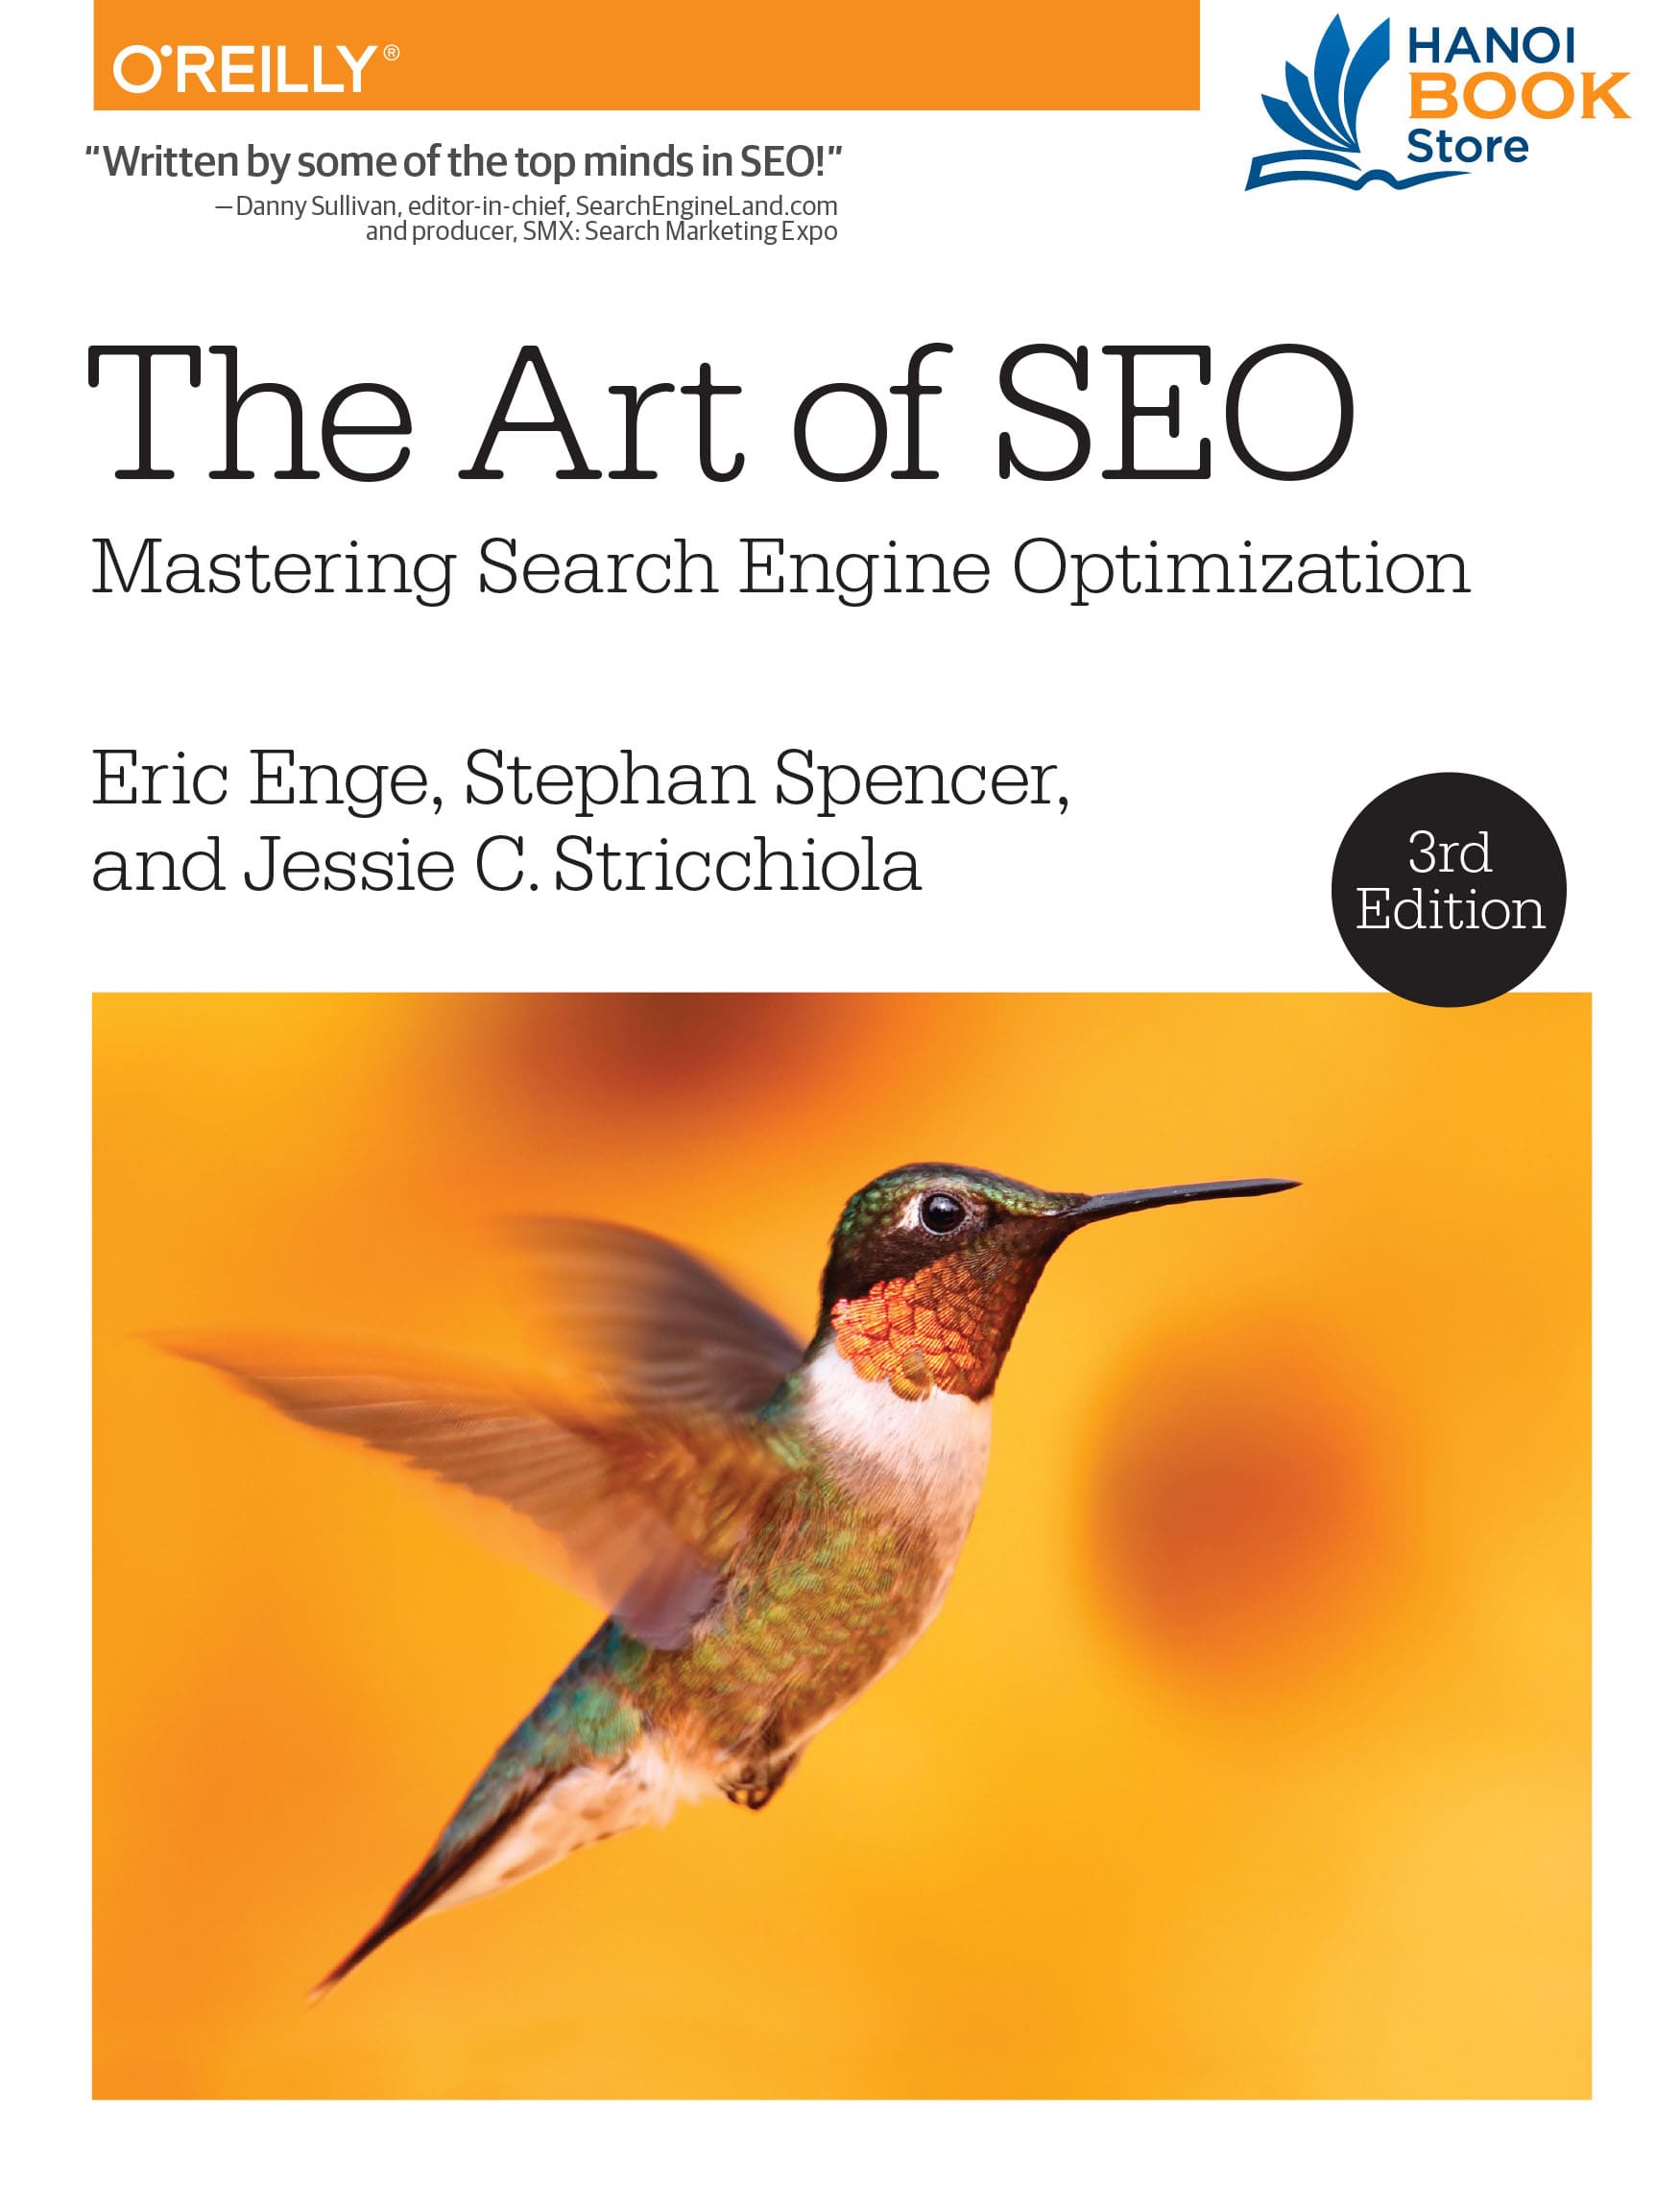 8. The Art of SEO by Eric Enge, Stephan Spencer, and Jessie Strichola